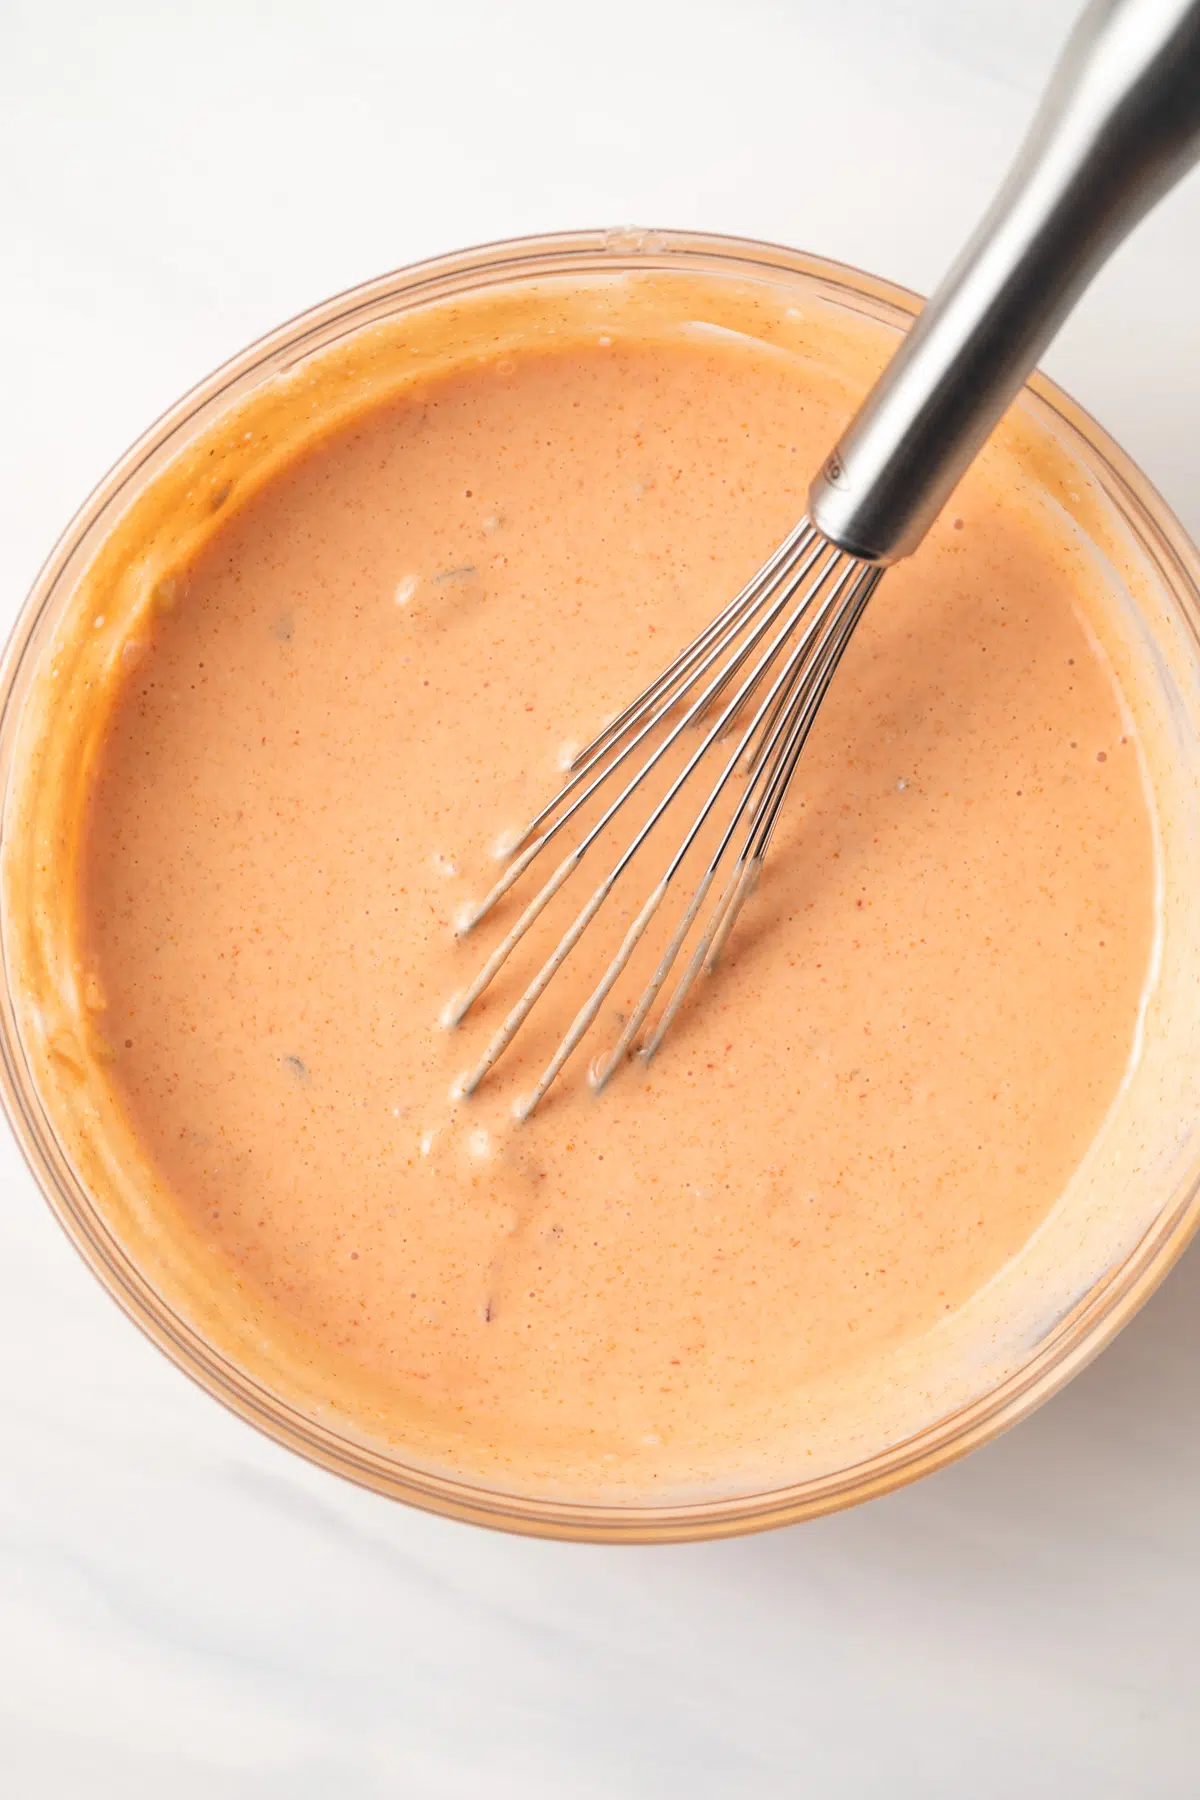 Creamy russian dressing whisked in a glass bowl.